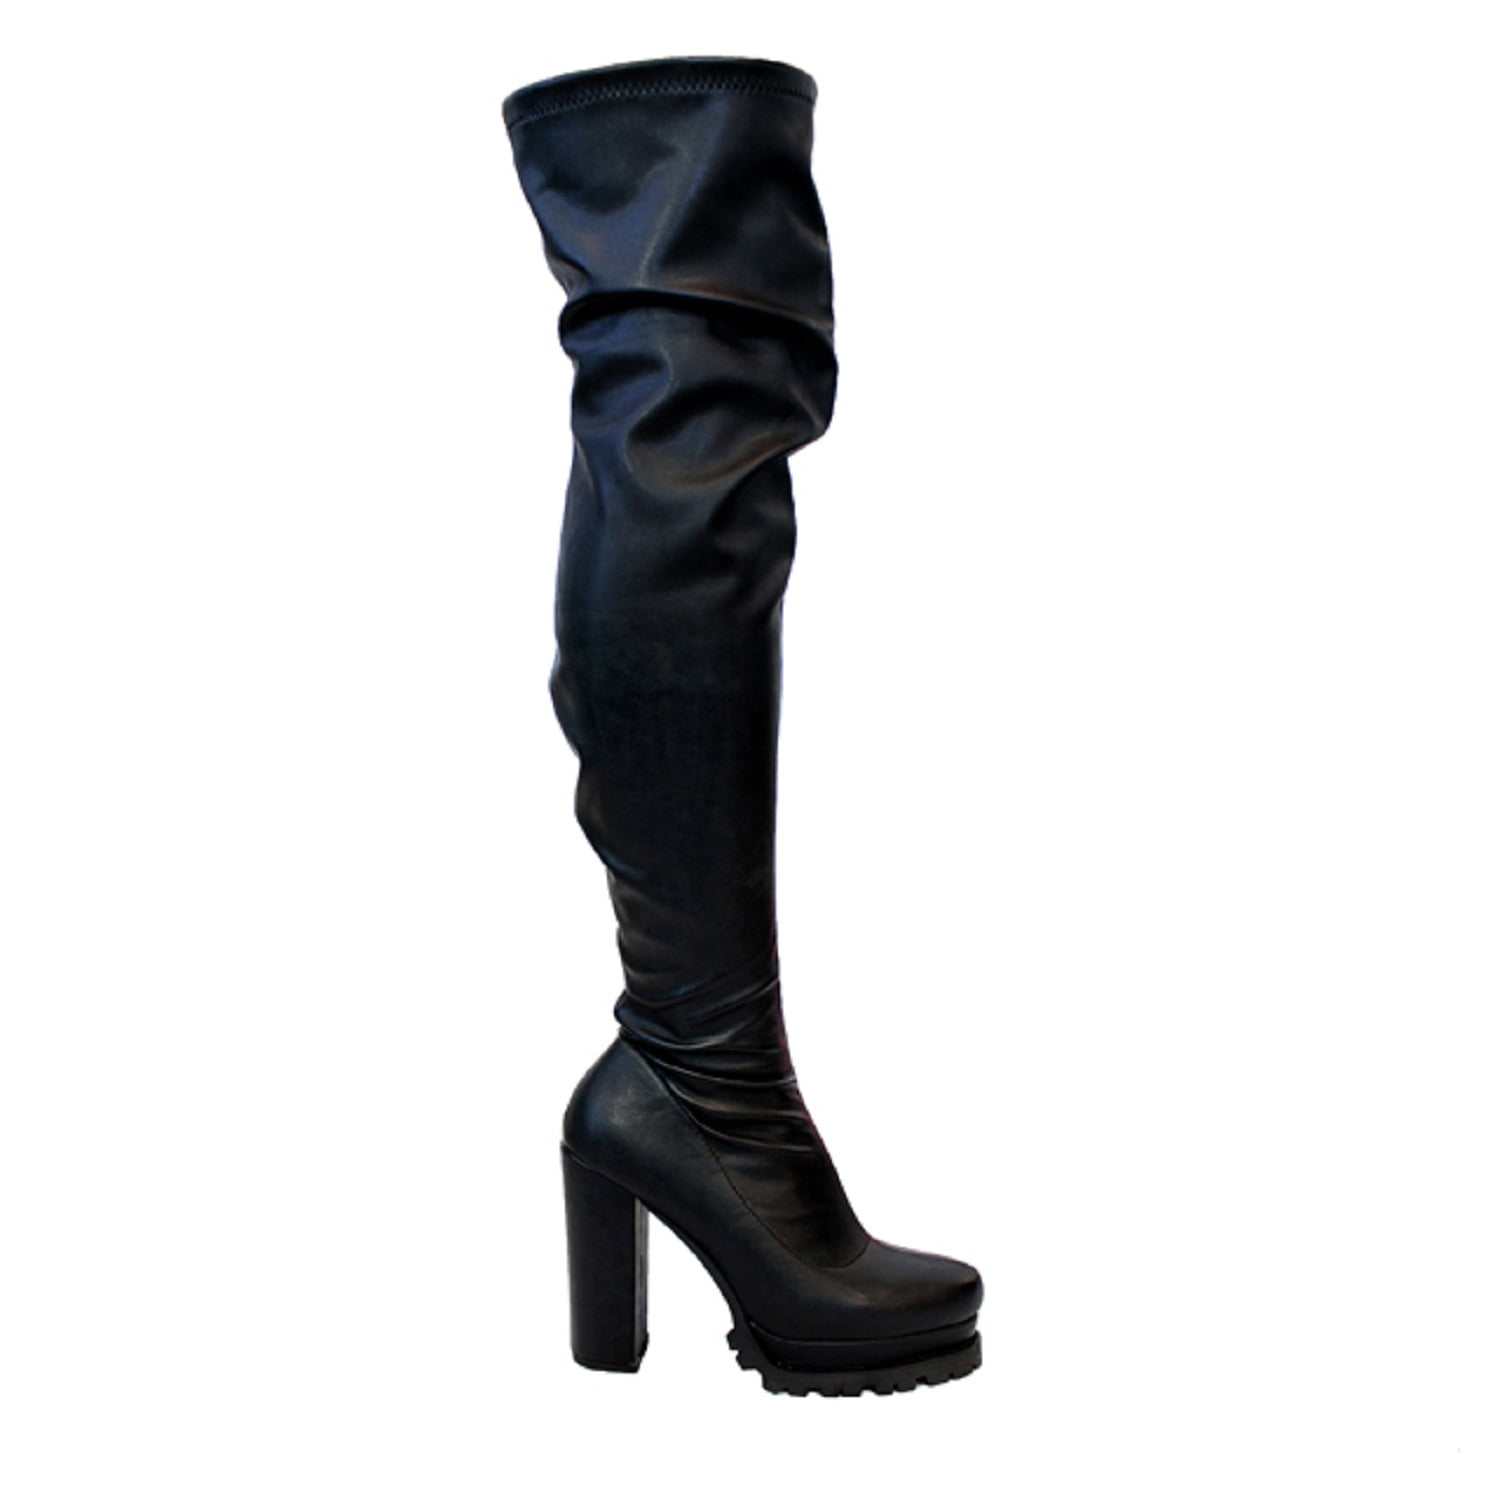 Womens Ladies Thigh High Black Boots Stiletto High Heels Puffer Boots Shoes Size